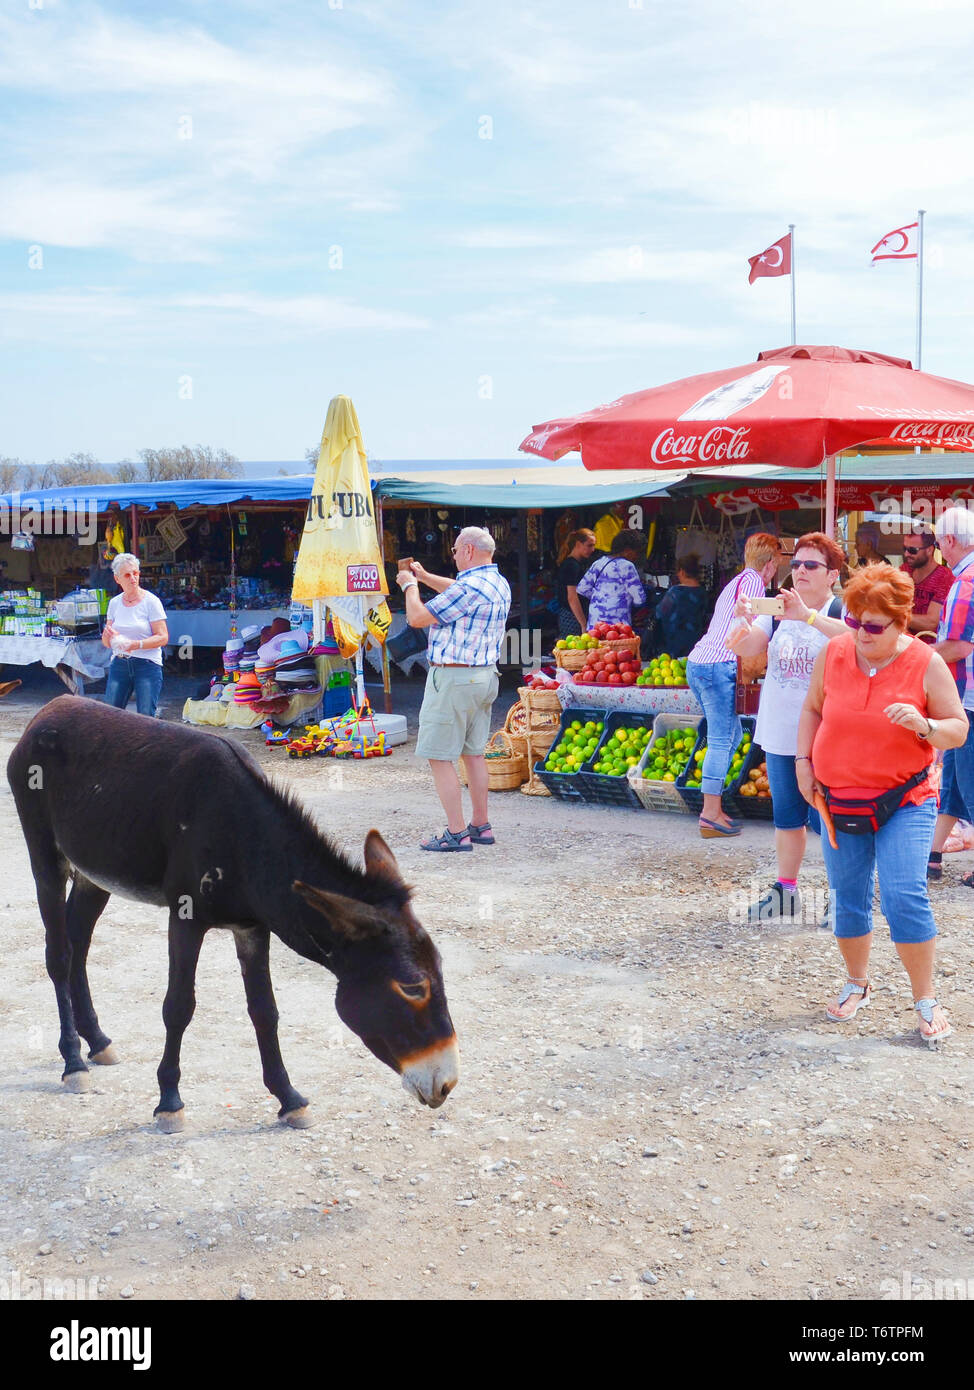 Dipkarpaz, Turkish Northern Cyprus - Oct 3rd 2018: Wild donkey on the outdoor fruit market. Tourists are taking pictures of the animal with the phone. Market stands in the background. Stock Photo